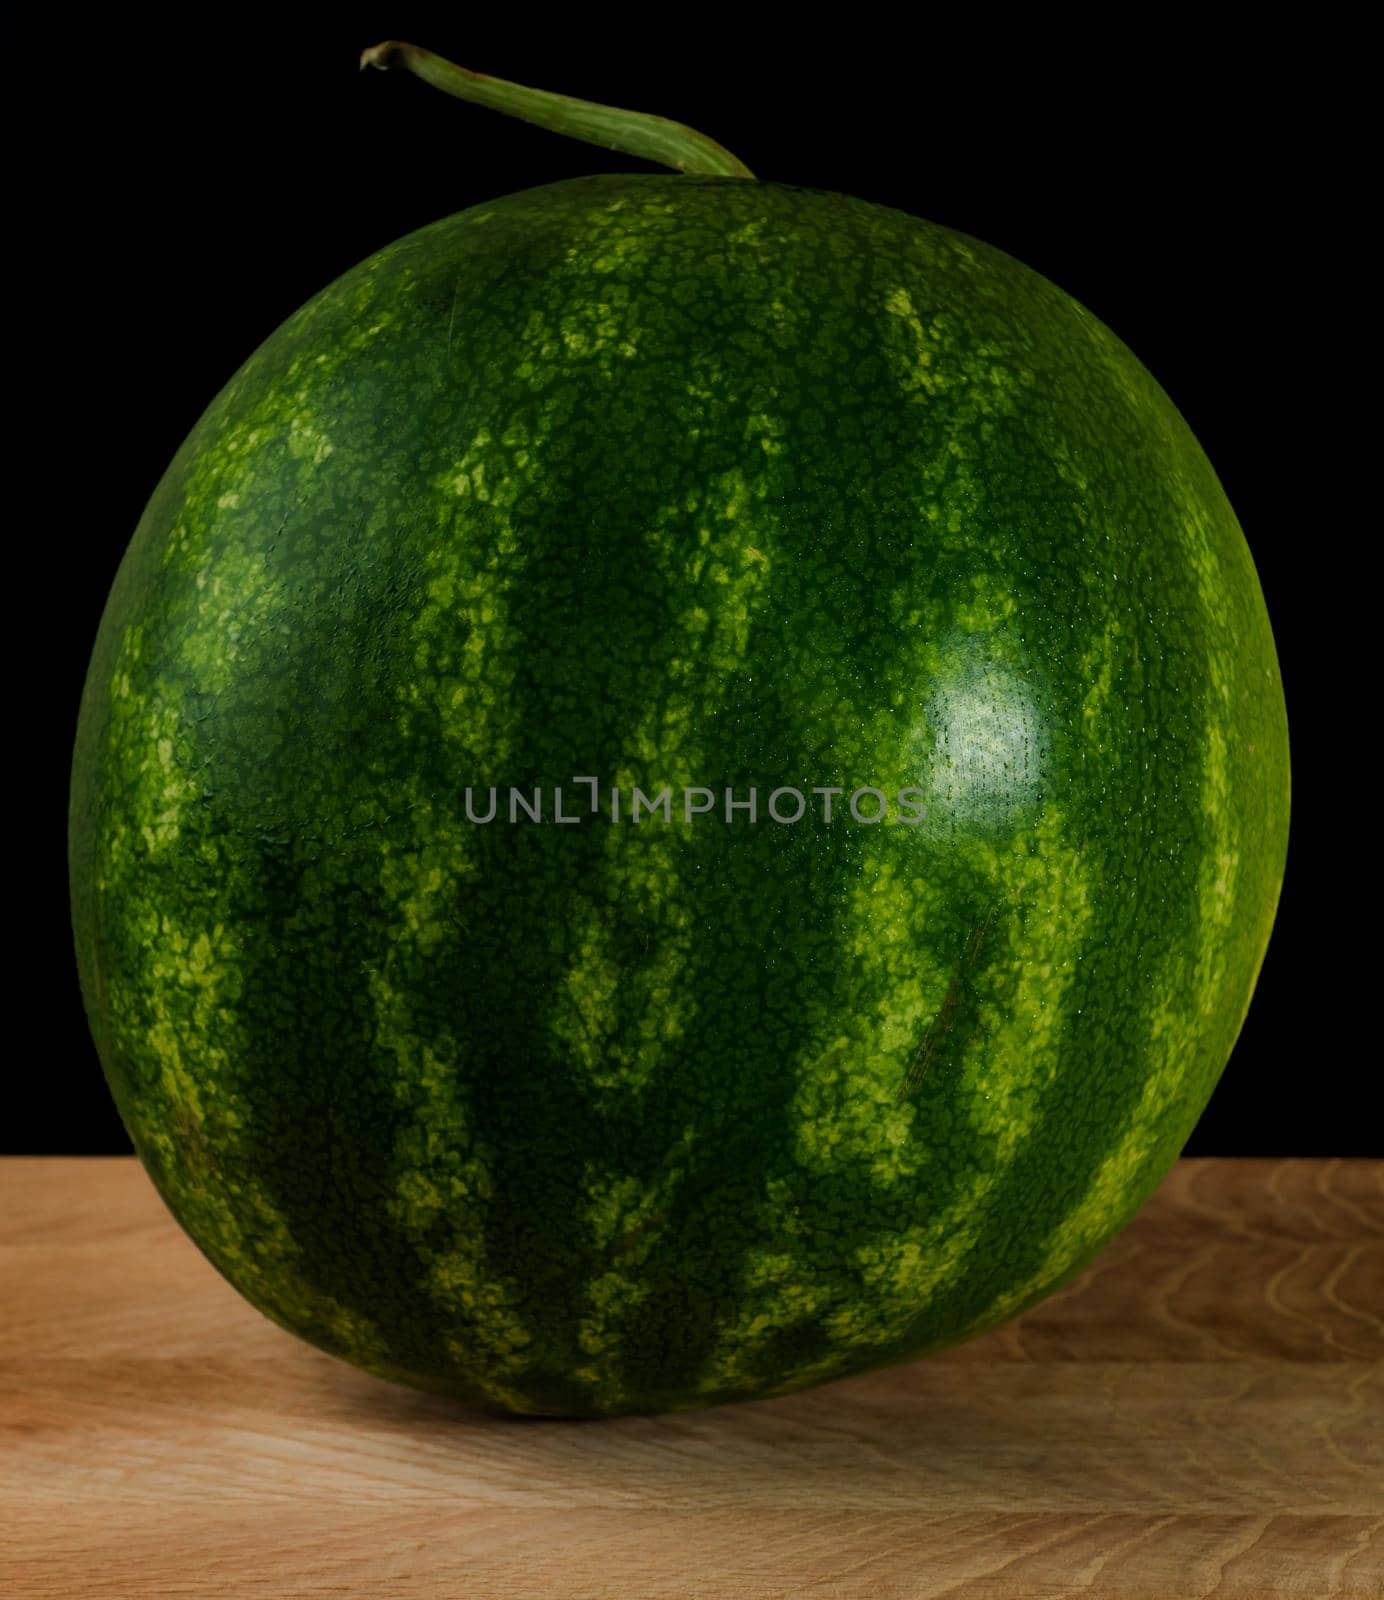 Whole watermelon, on wood board, on black background